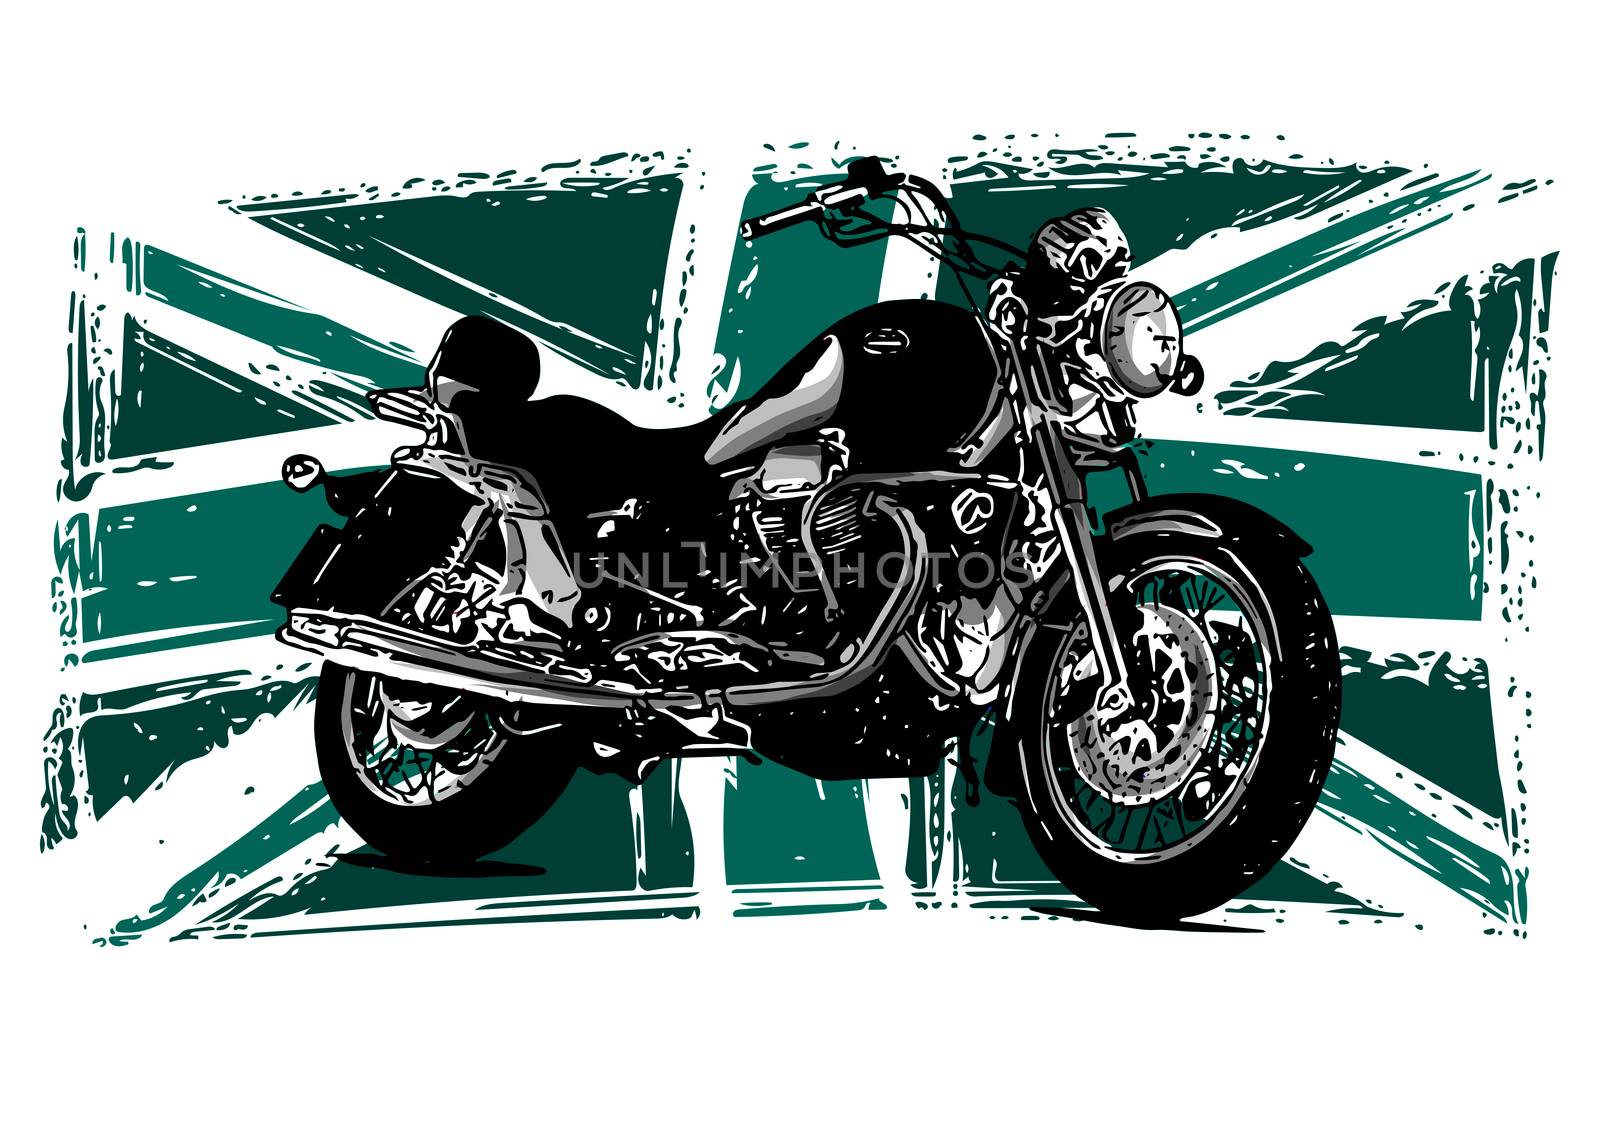 Custom Motorbike with great britain flag in background by dean